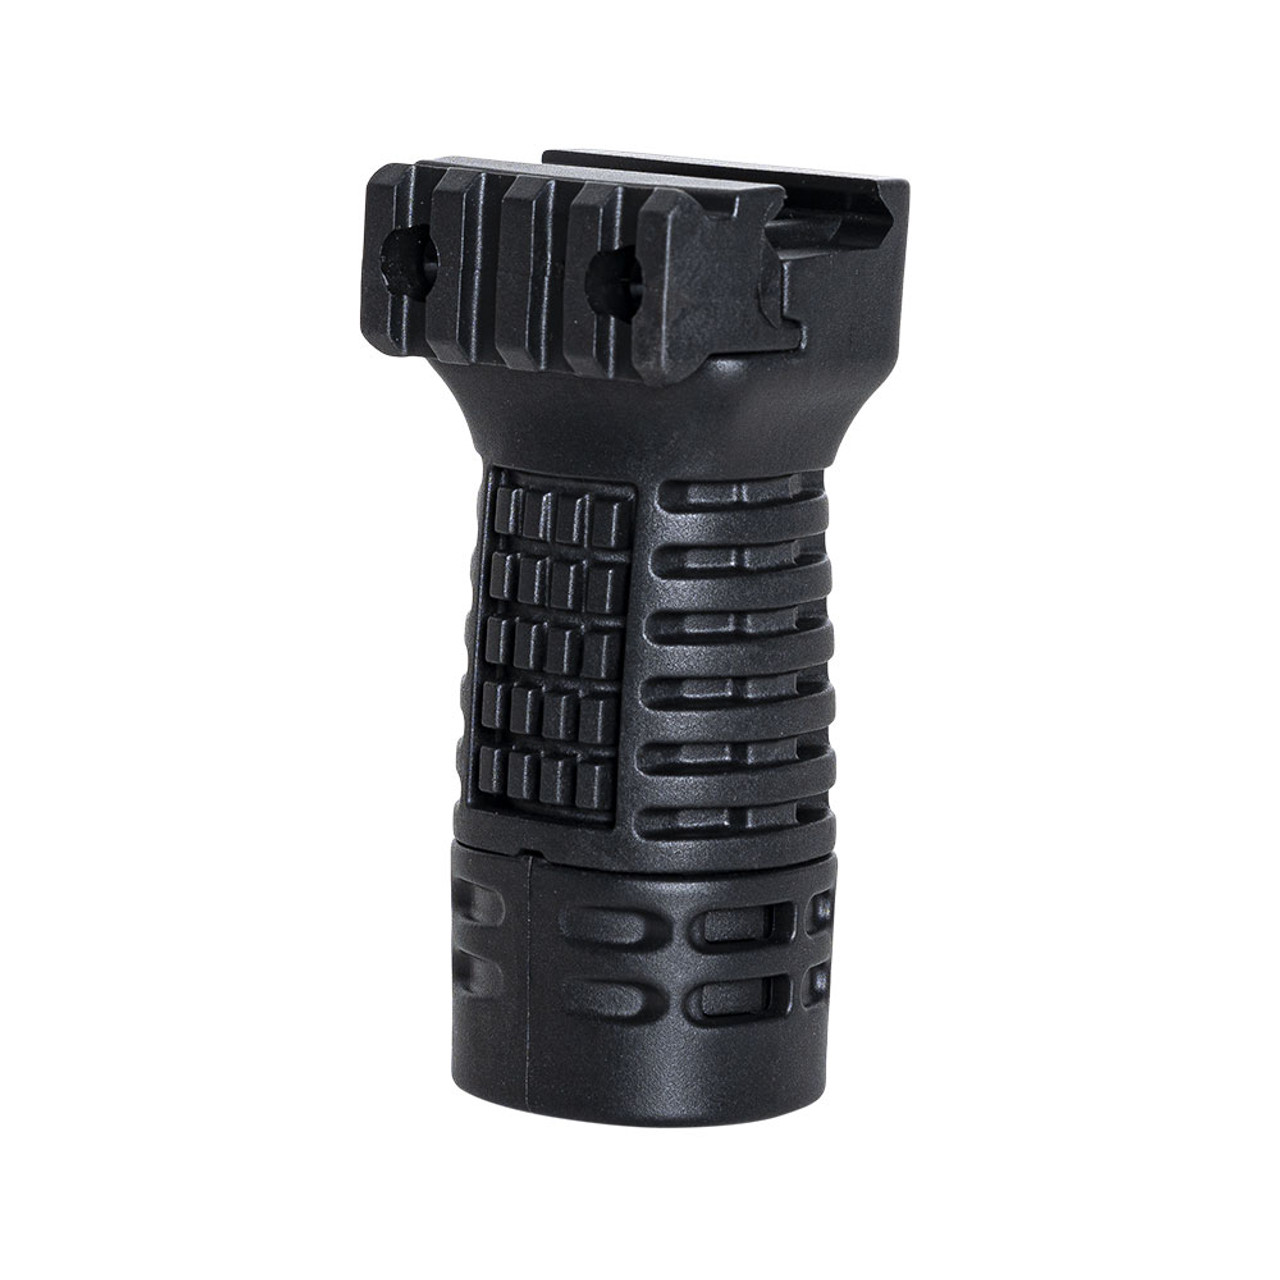 Ncstar VG116 Textured Mid-Length Vertical Grip With Side Accessory Rail Black